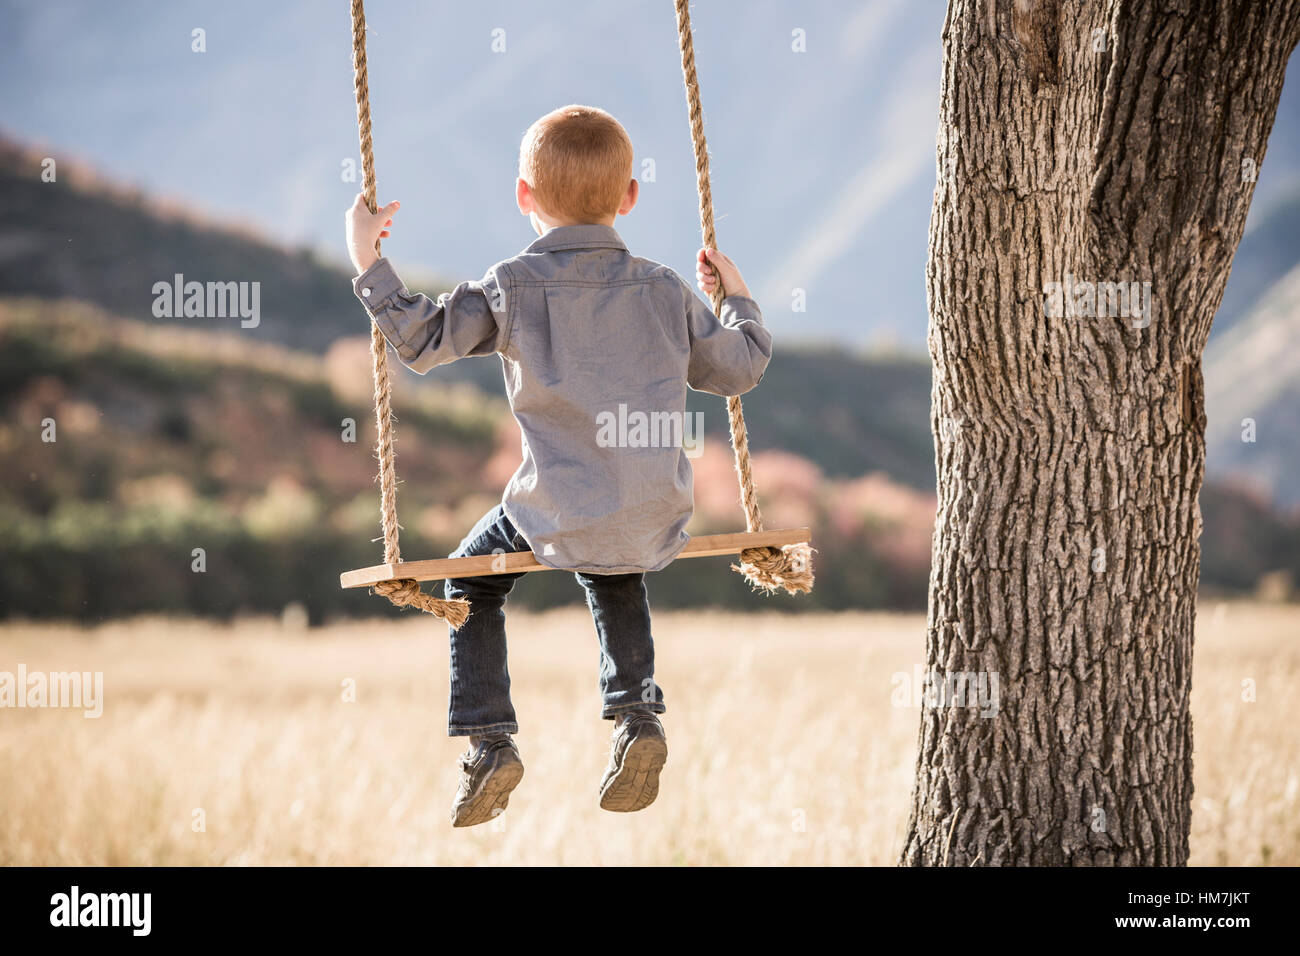 Boy (4-5) sitting on swing Banque D'Images